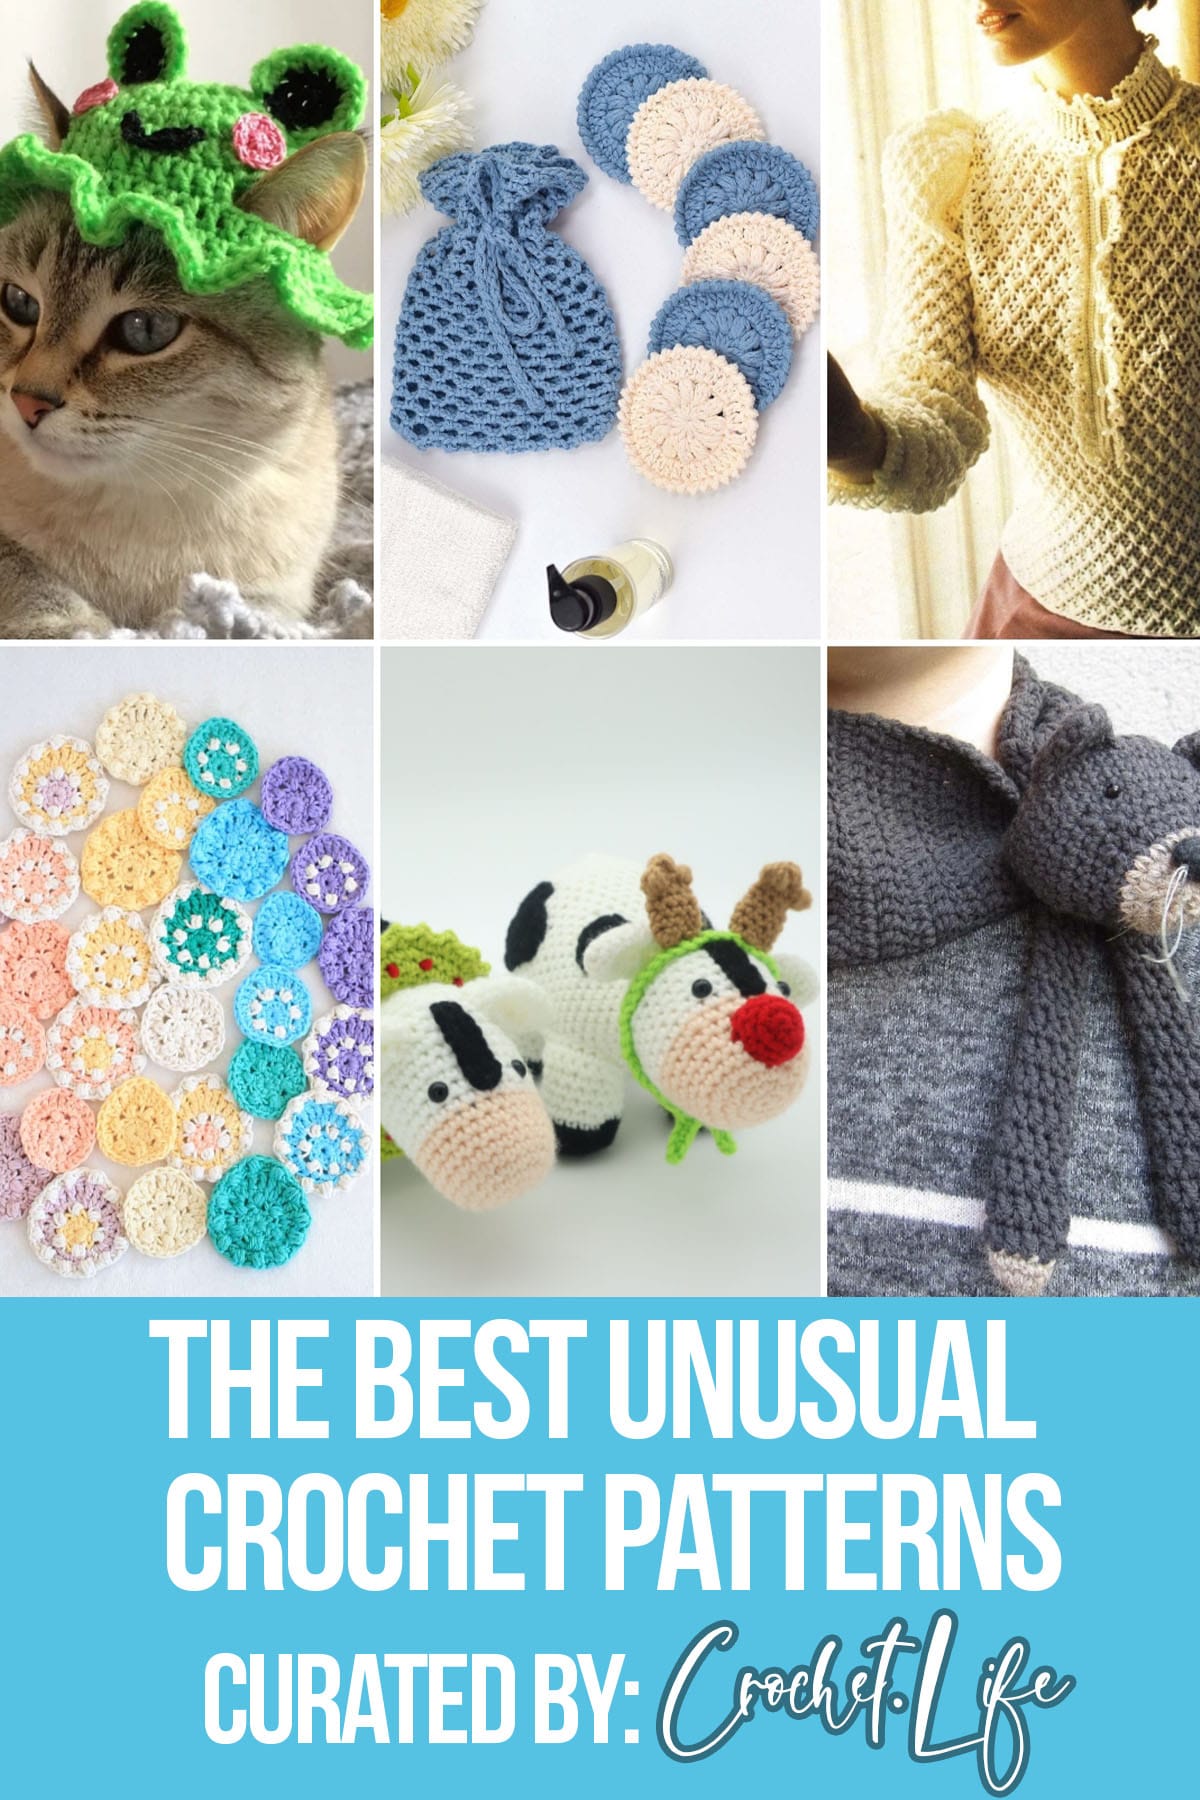 photo collage of unique crochet patterns with text which reads the best unusual crochet patterns curated by crochet.life